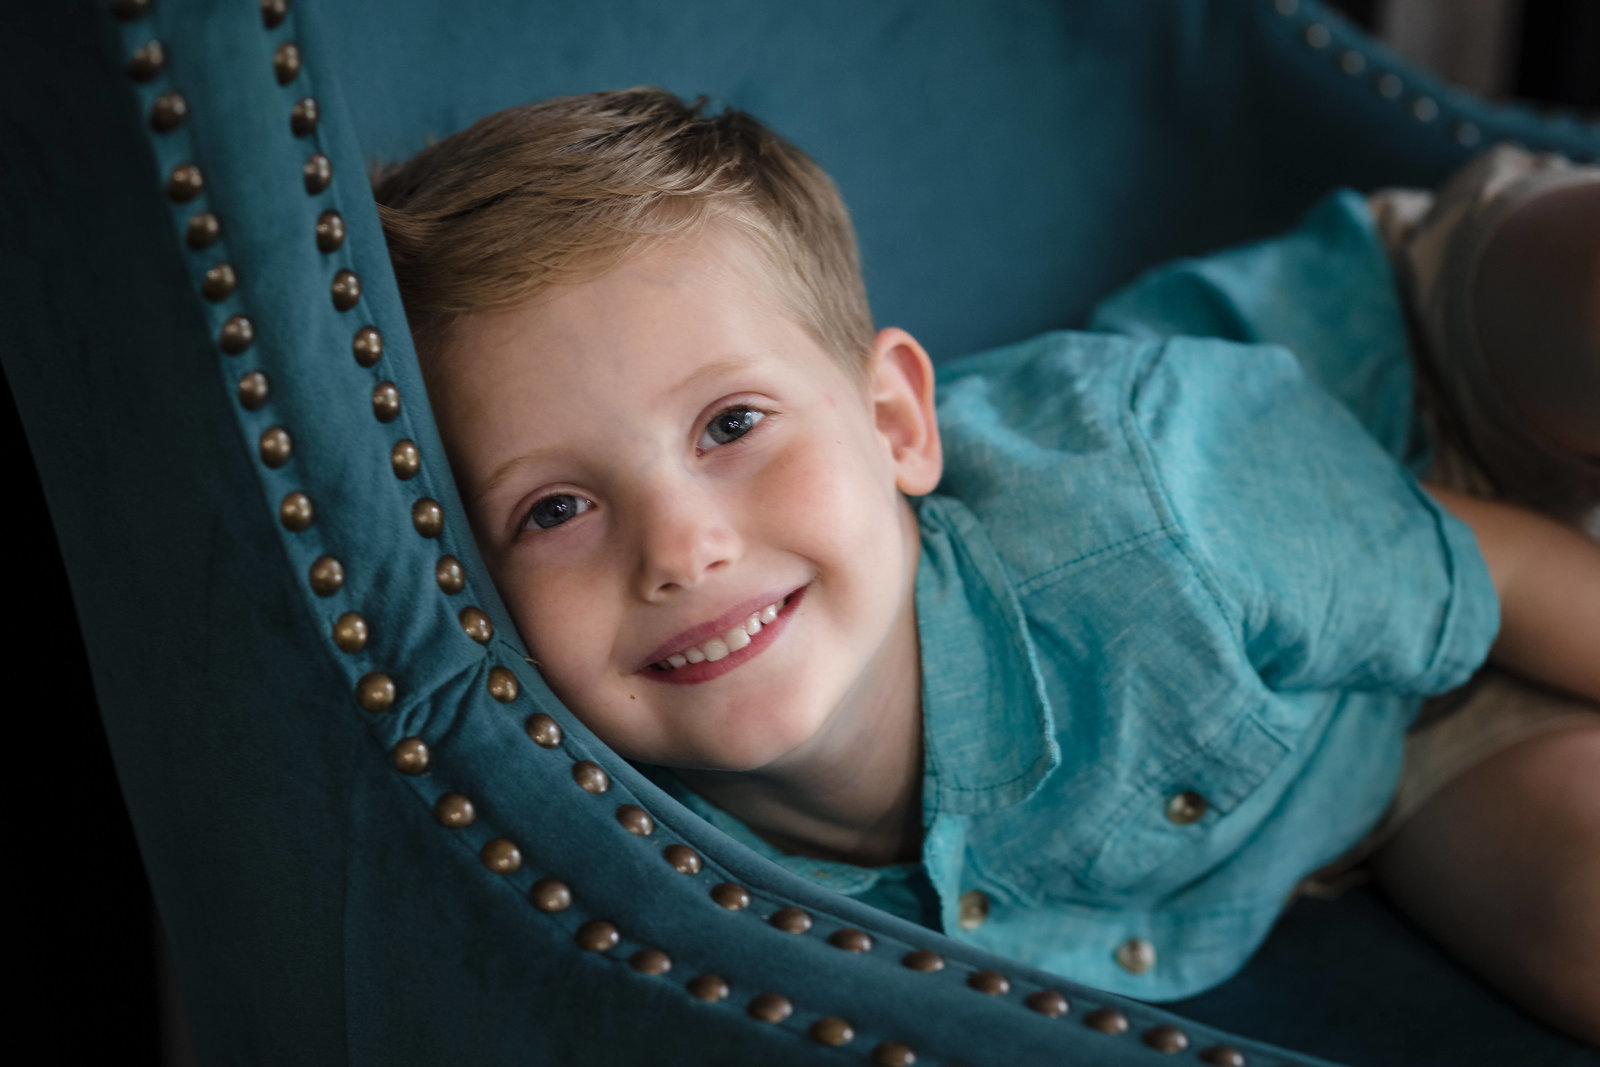 Young boy smiling playfully on chair